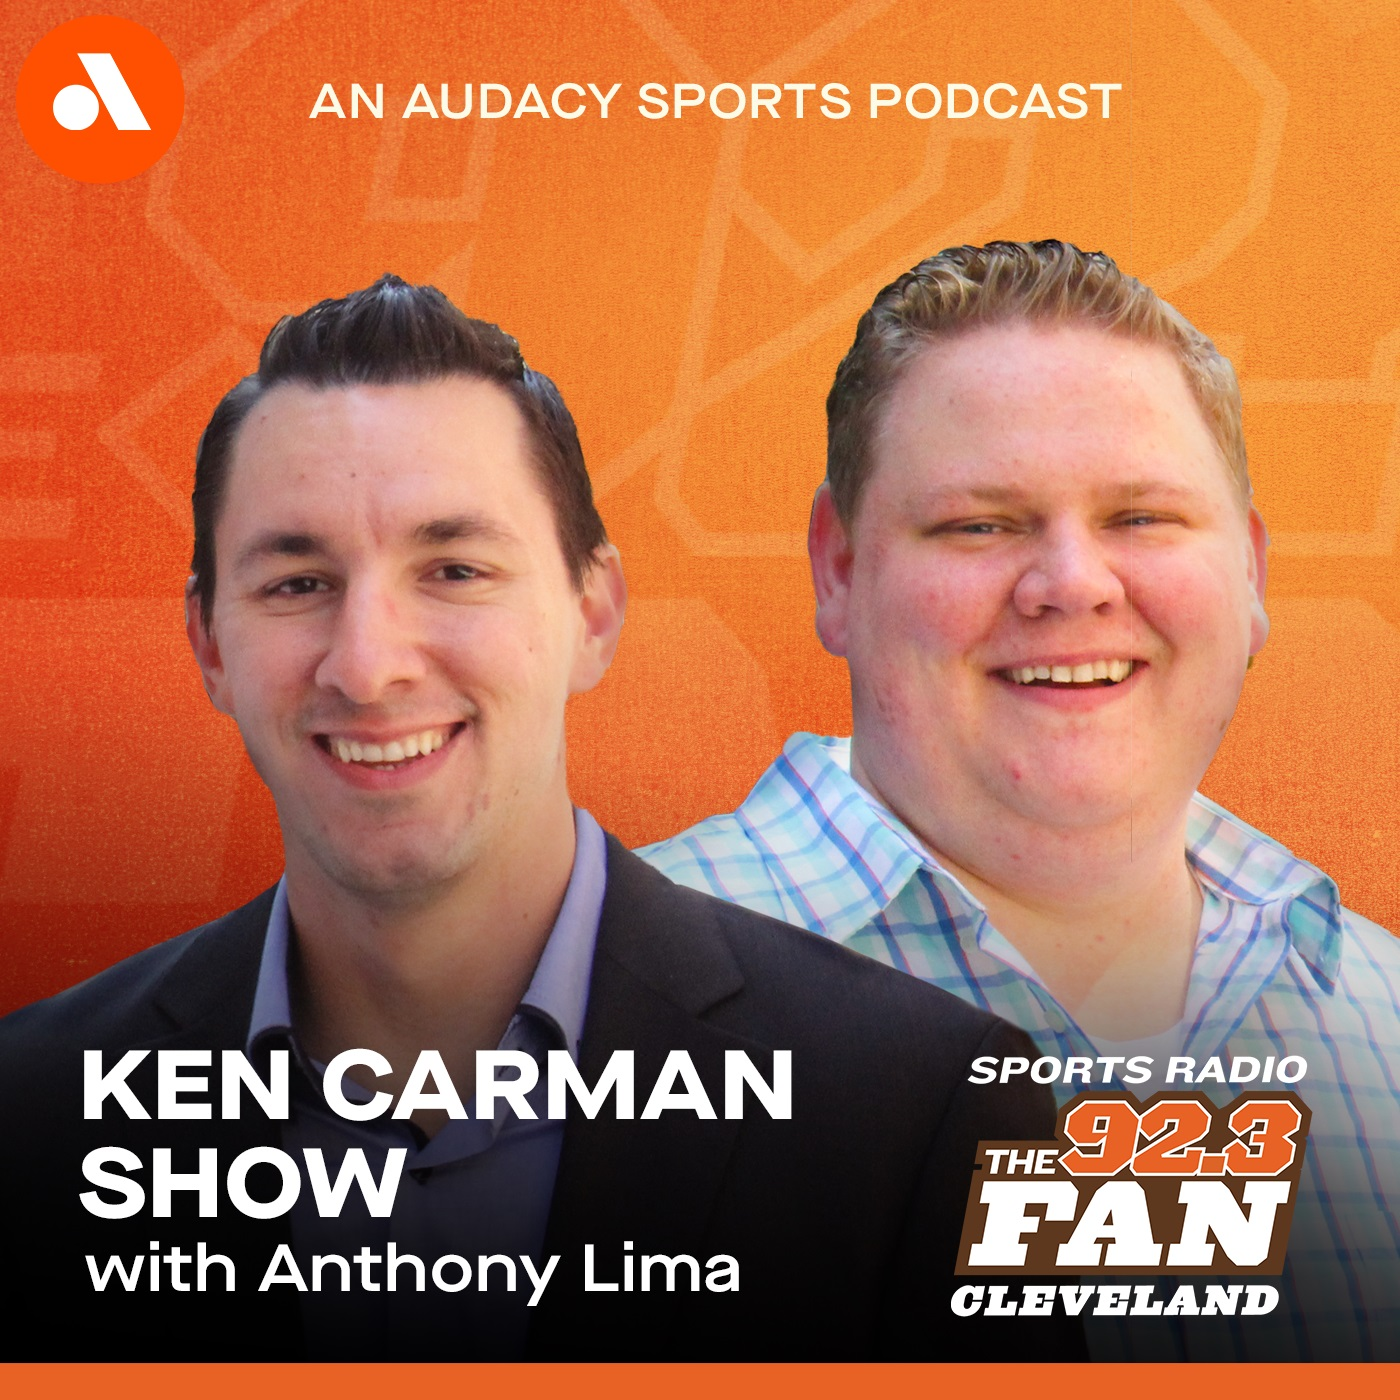 The Ken Carman Show with Anthony Lima: 7 in Heaven - Patriots leads the AFC